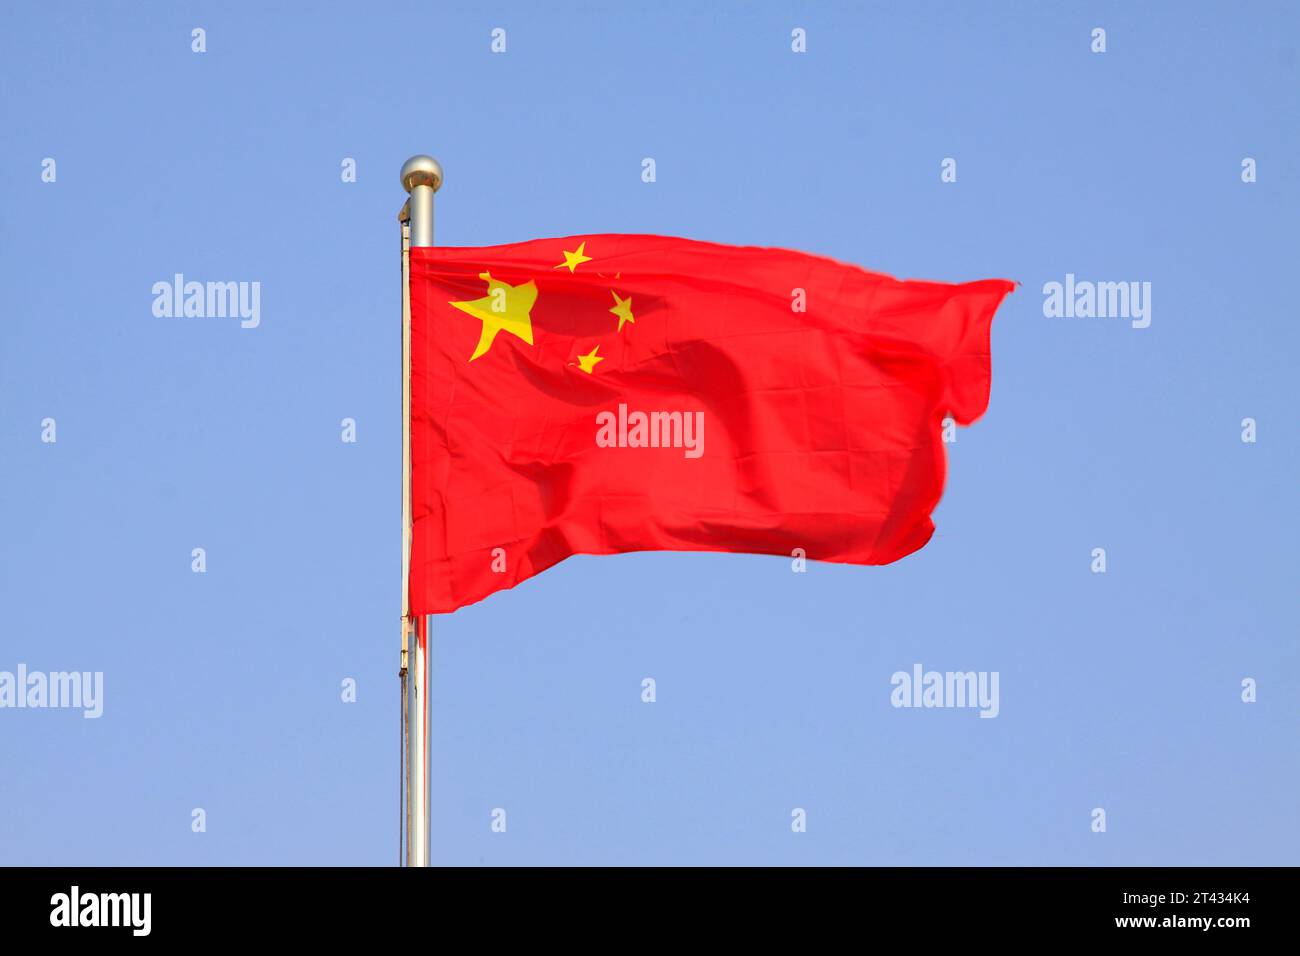 flag of the Republic of China, waving in the blue sky. Stock Photo